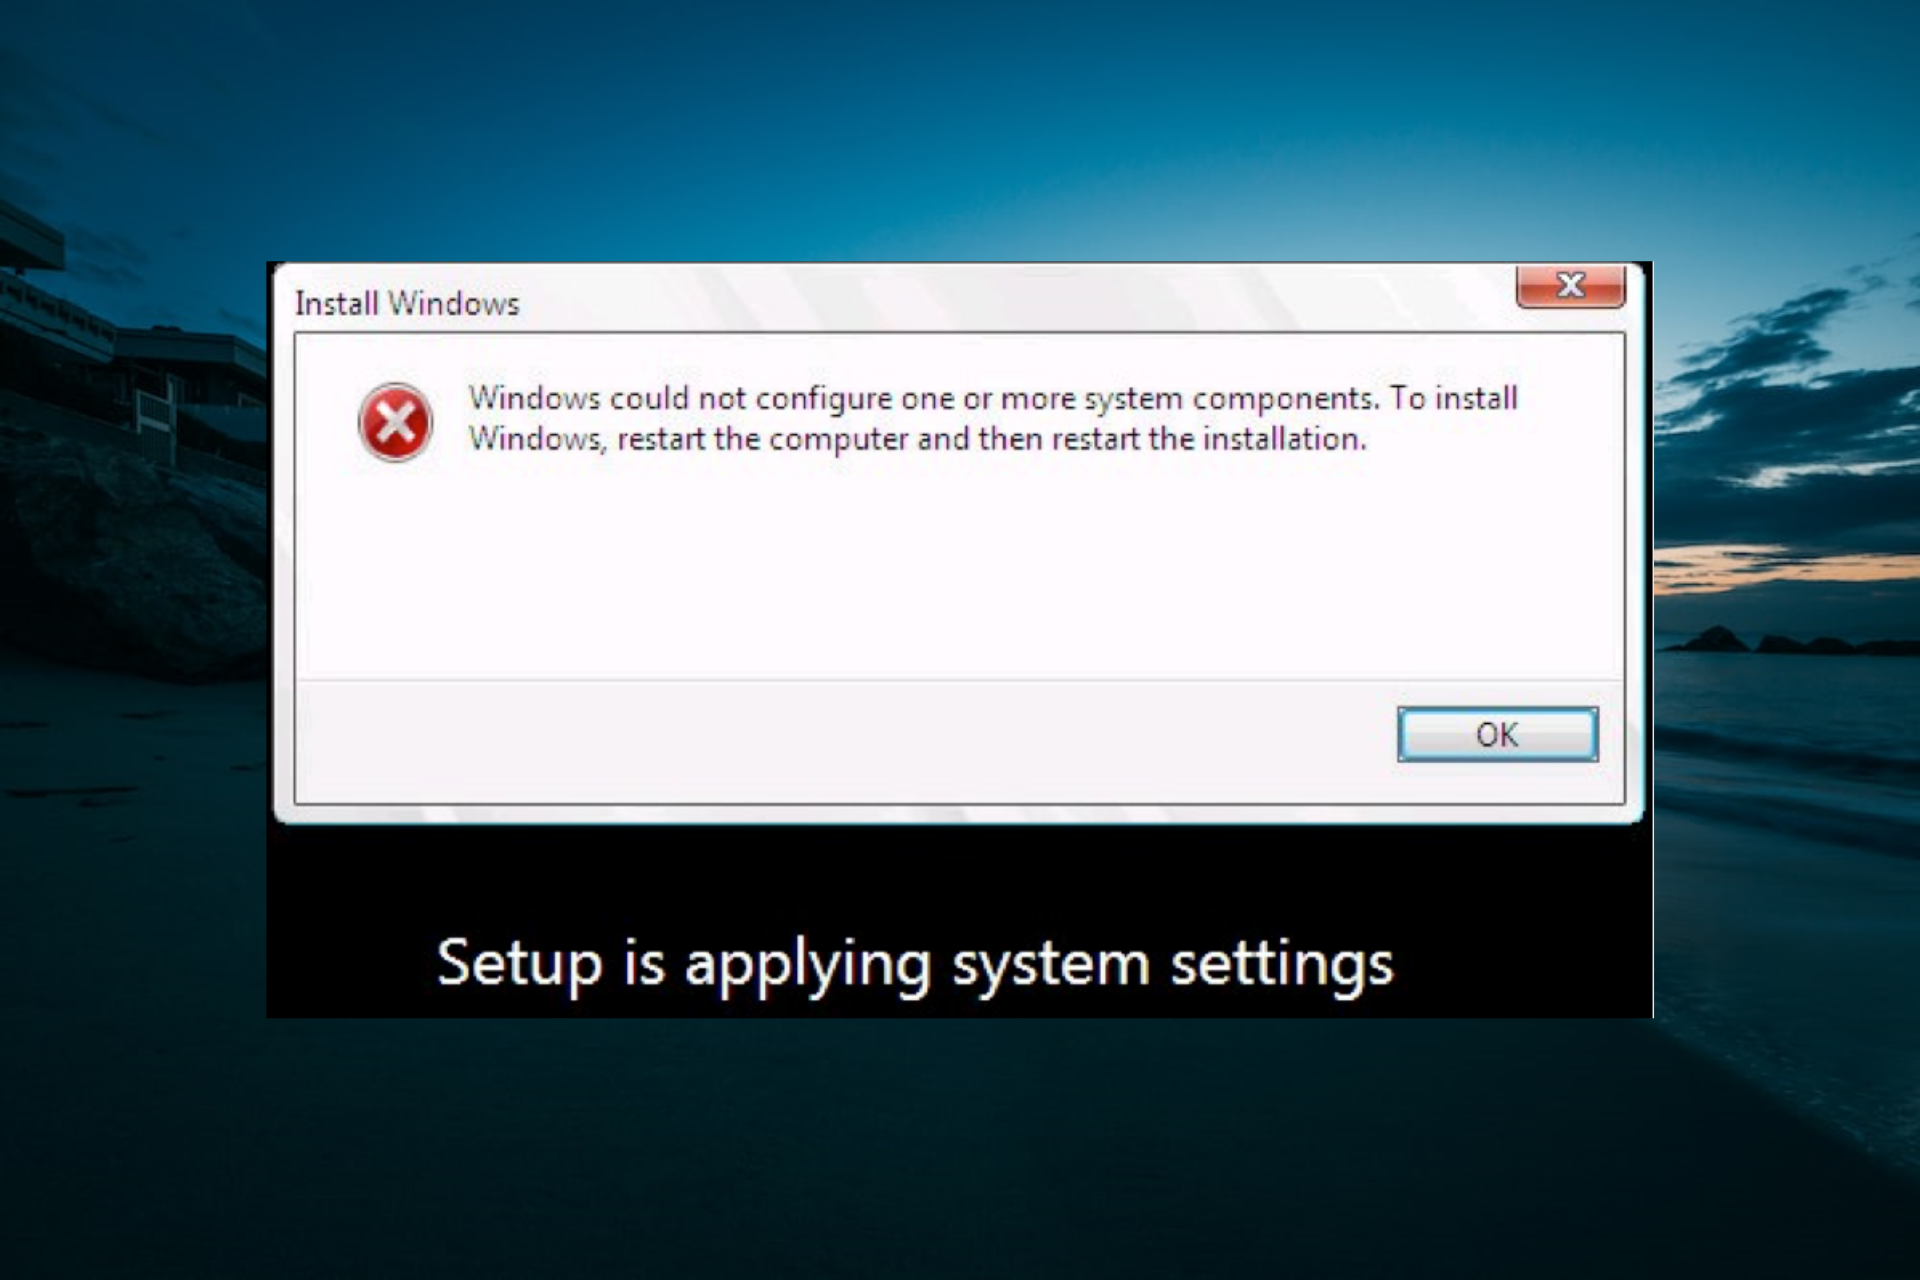 windows could not configure one or more system components